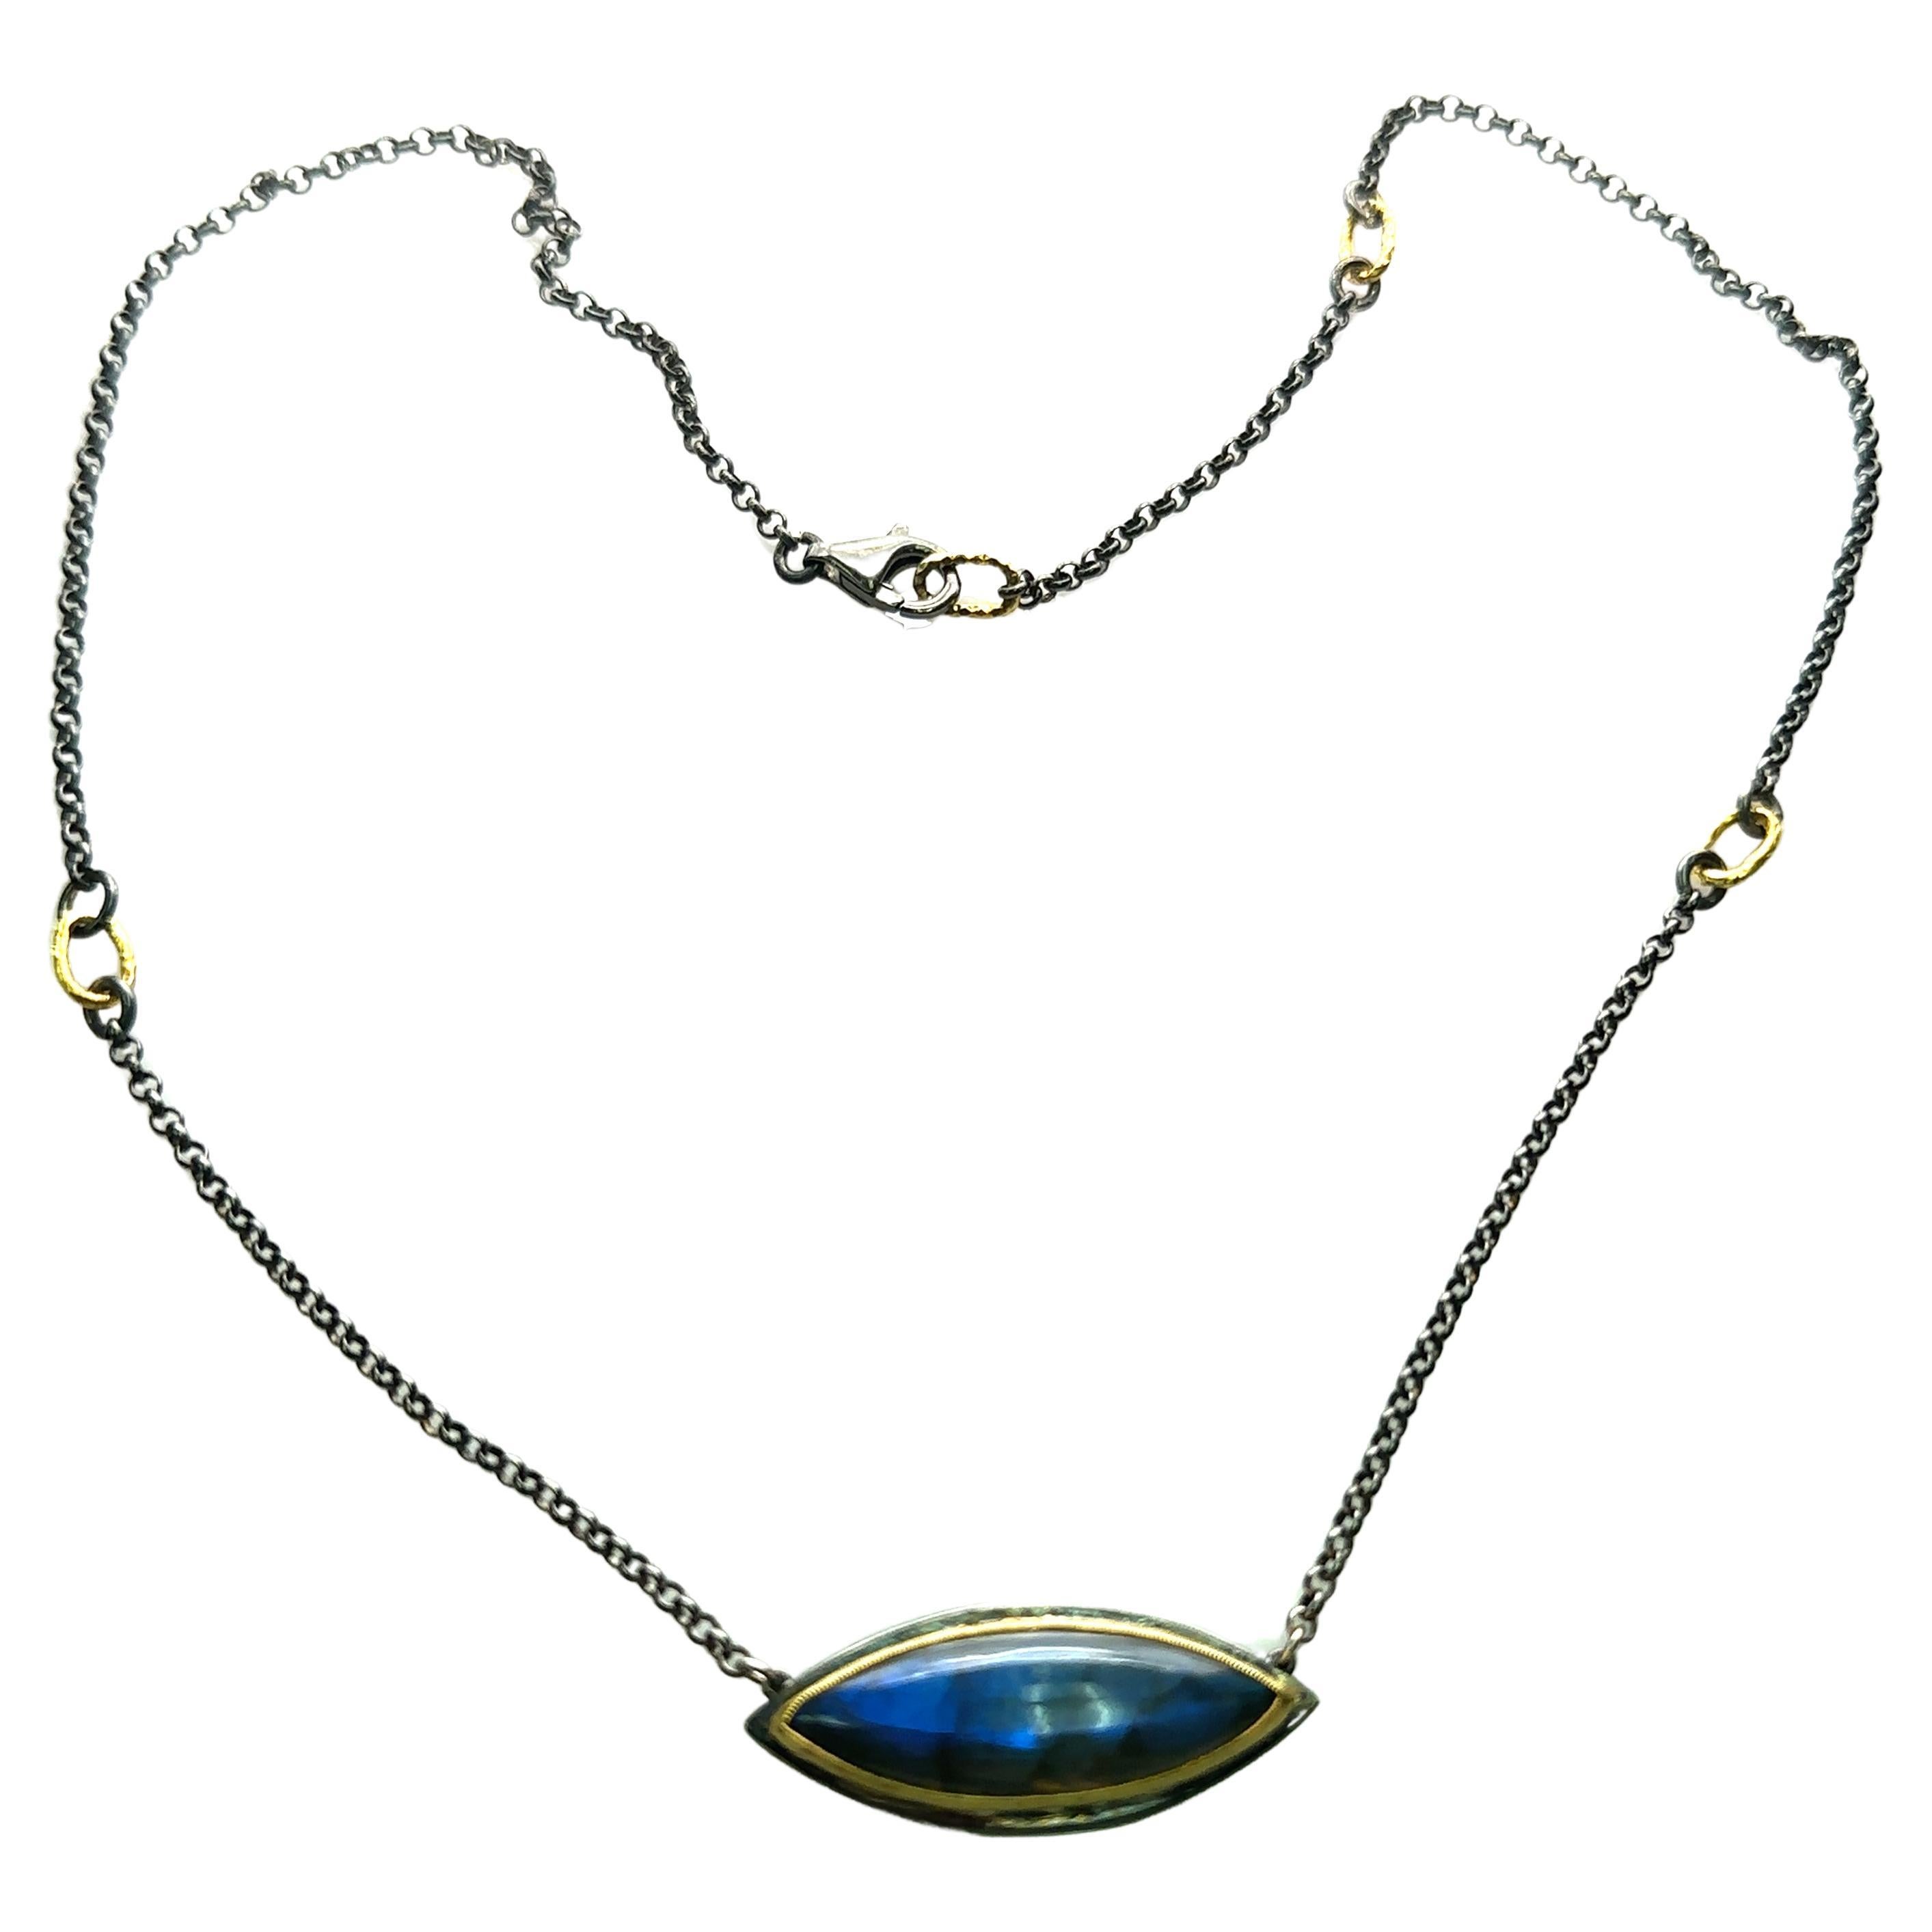 JAS-19-1839 - 24KT GOLD/SS 18" NECKLACE with LABRADORITE  For Sale